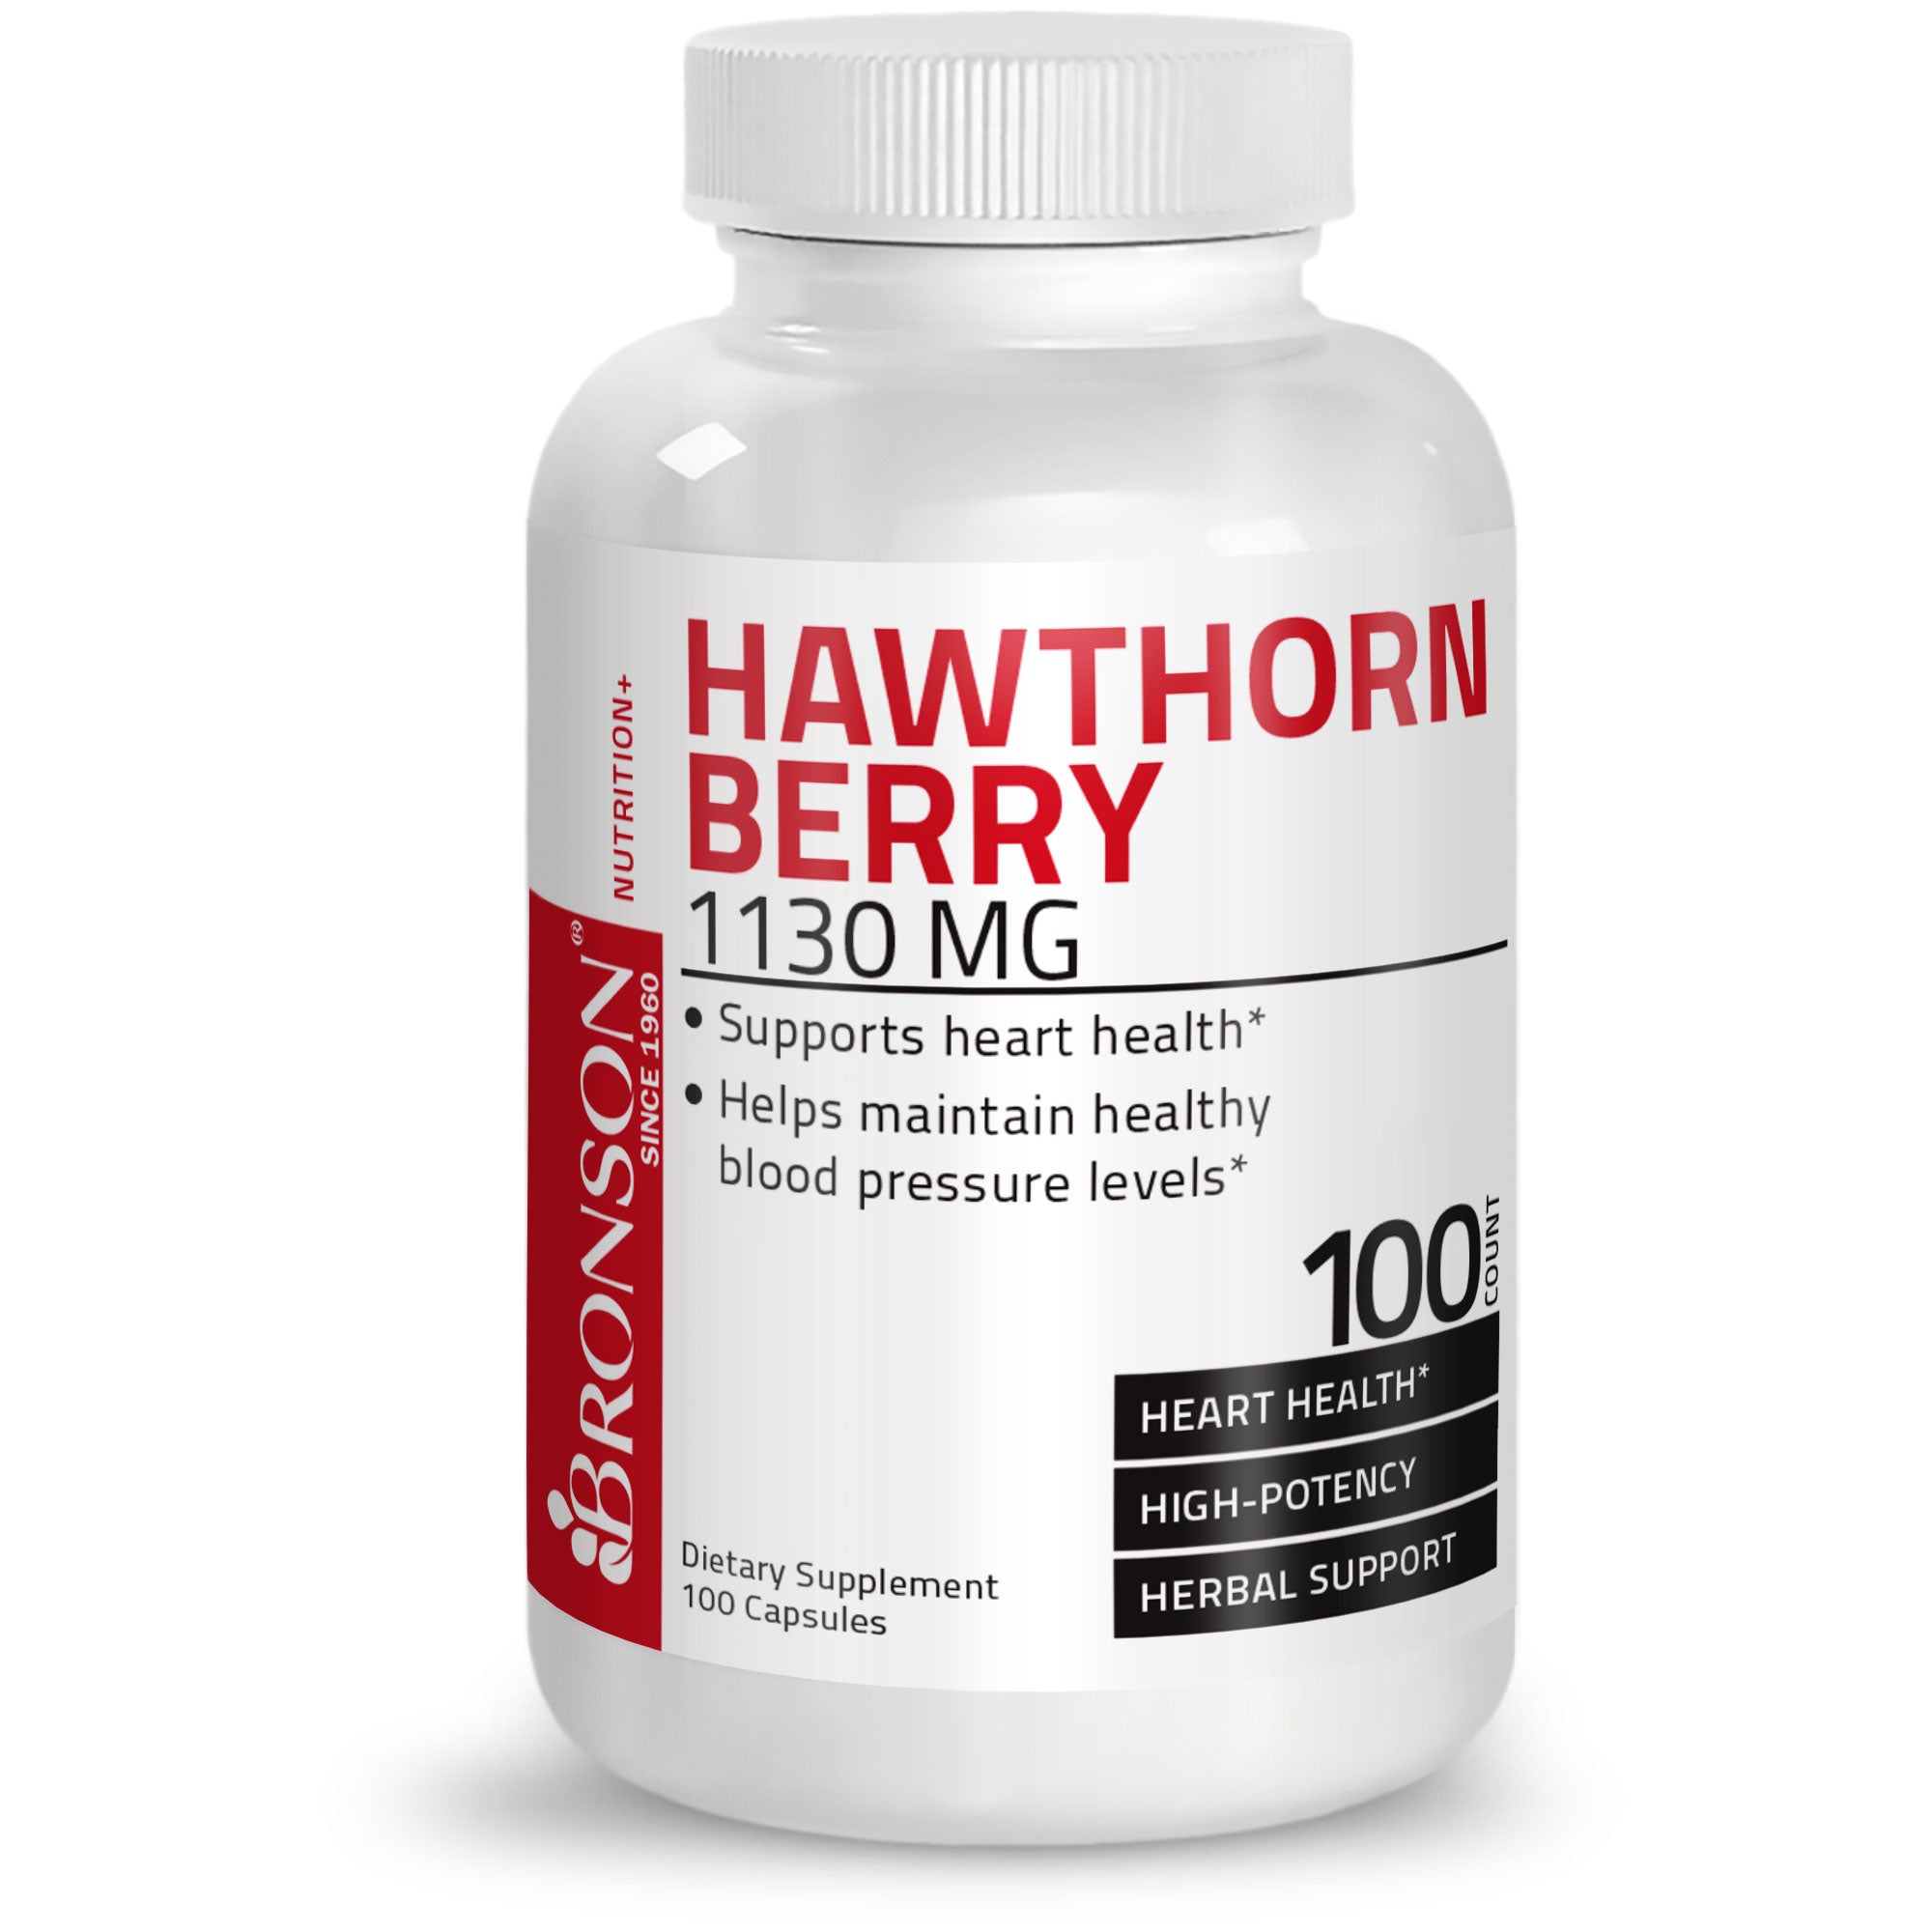 Hawthorn Berry - 1,130 mg - 100 Capsules view 3 of 6